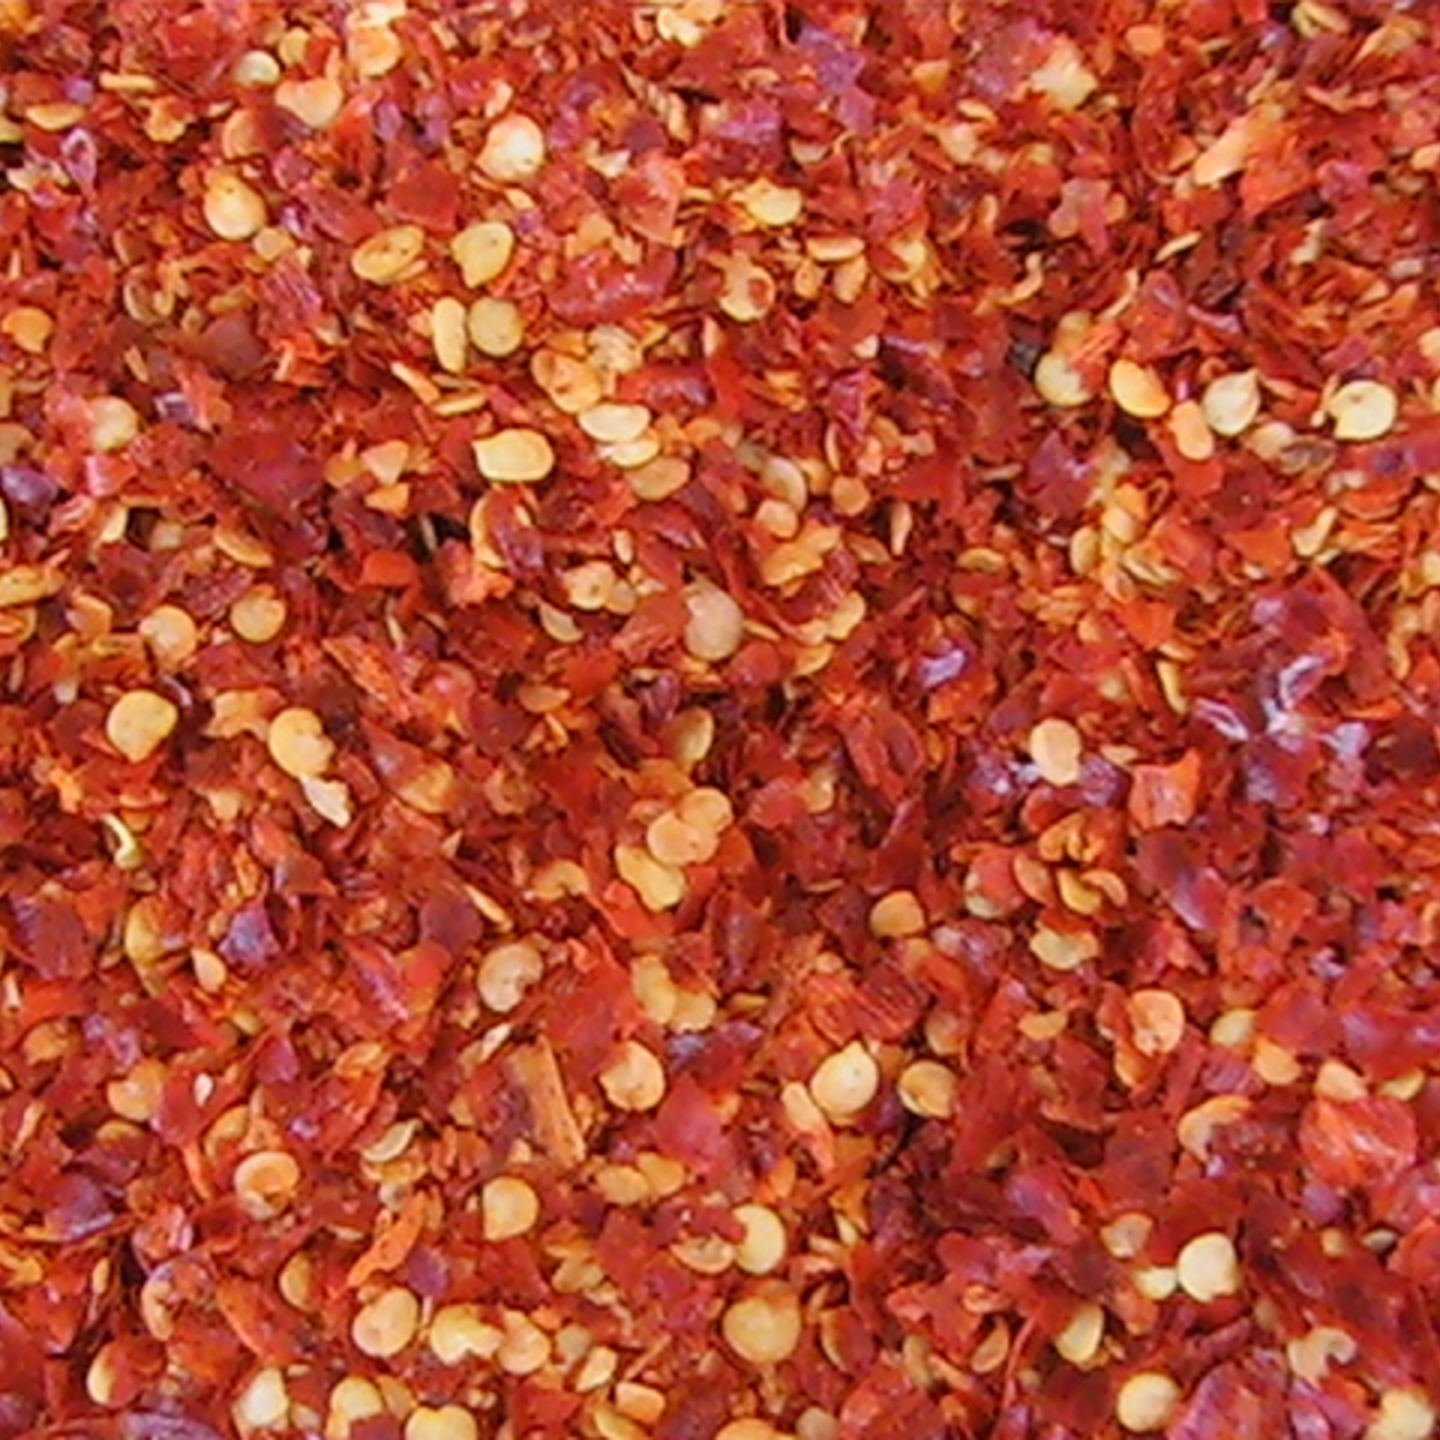 Red Chilly Flakes